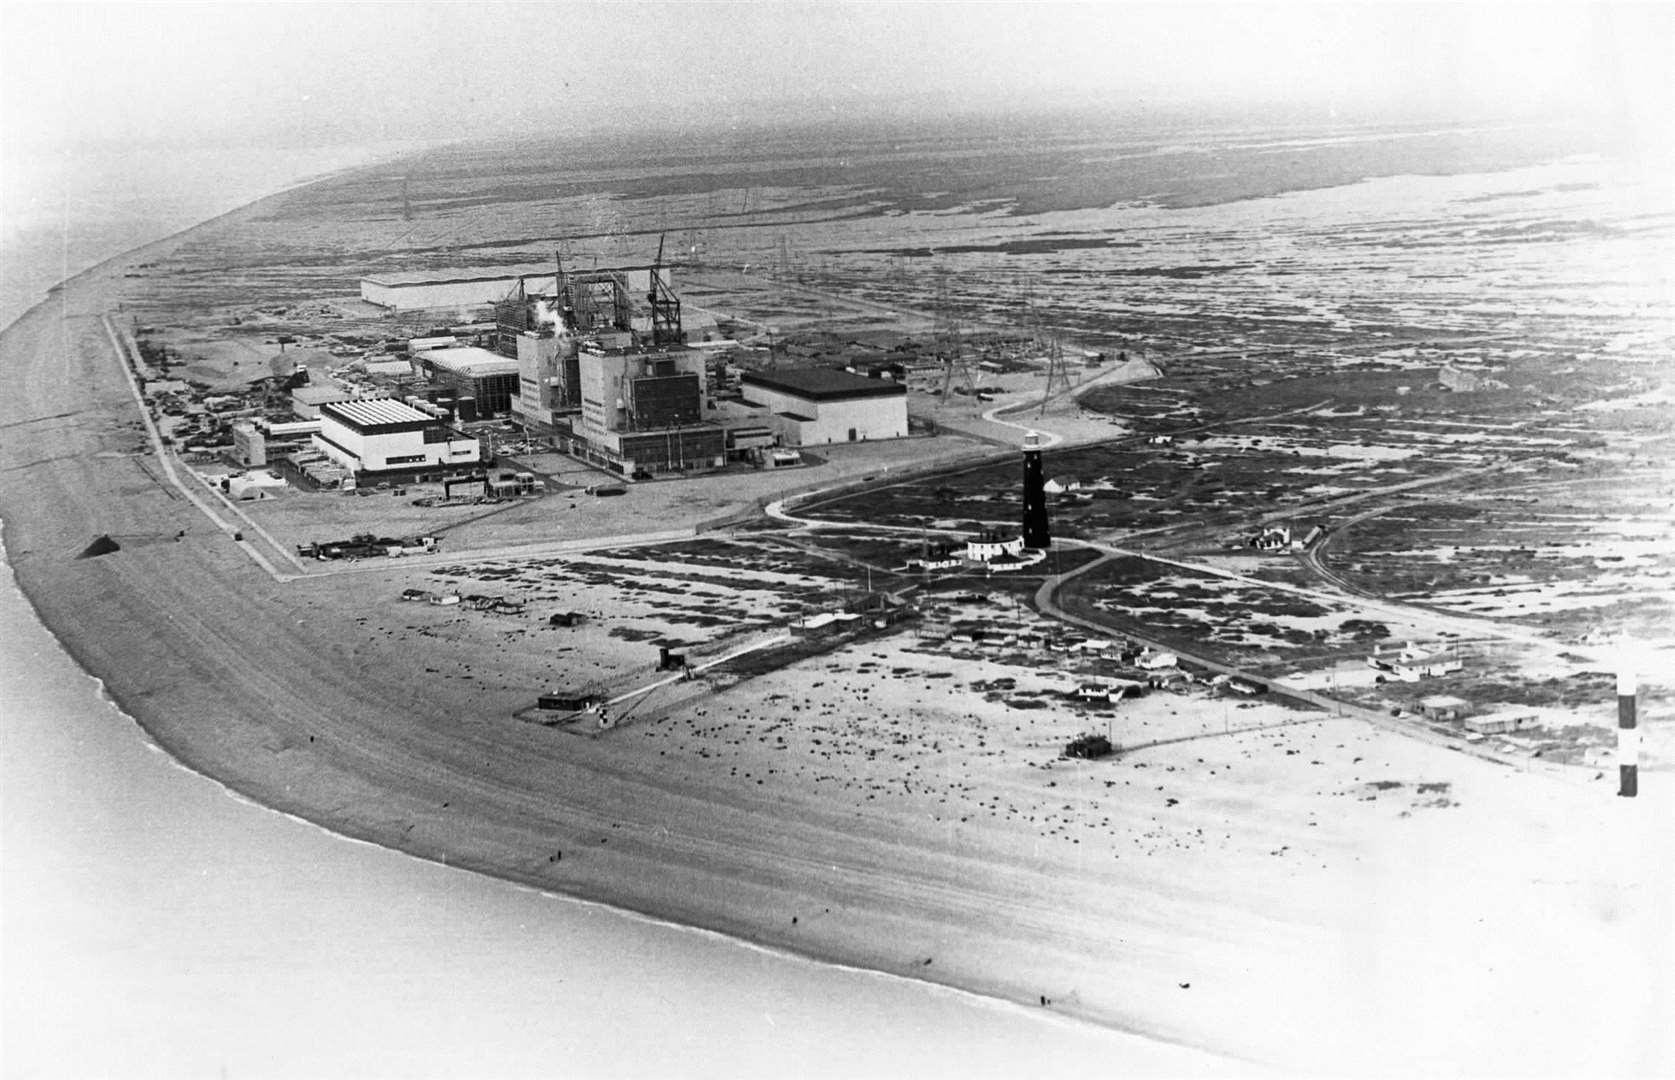 Aerial view of Dungeness power station in May 1968